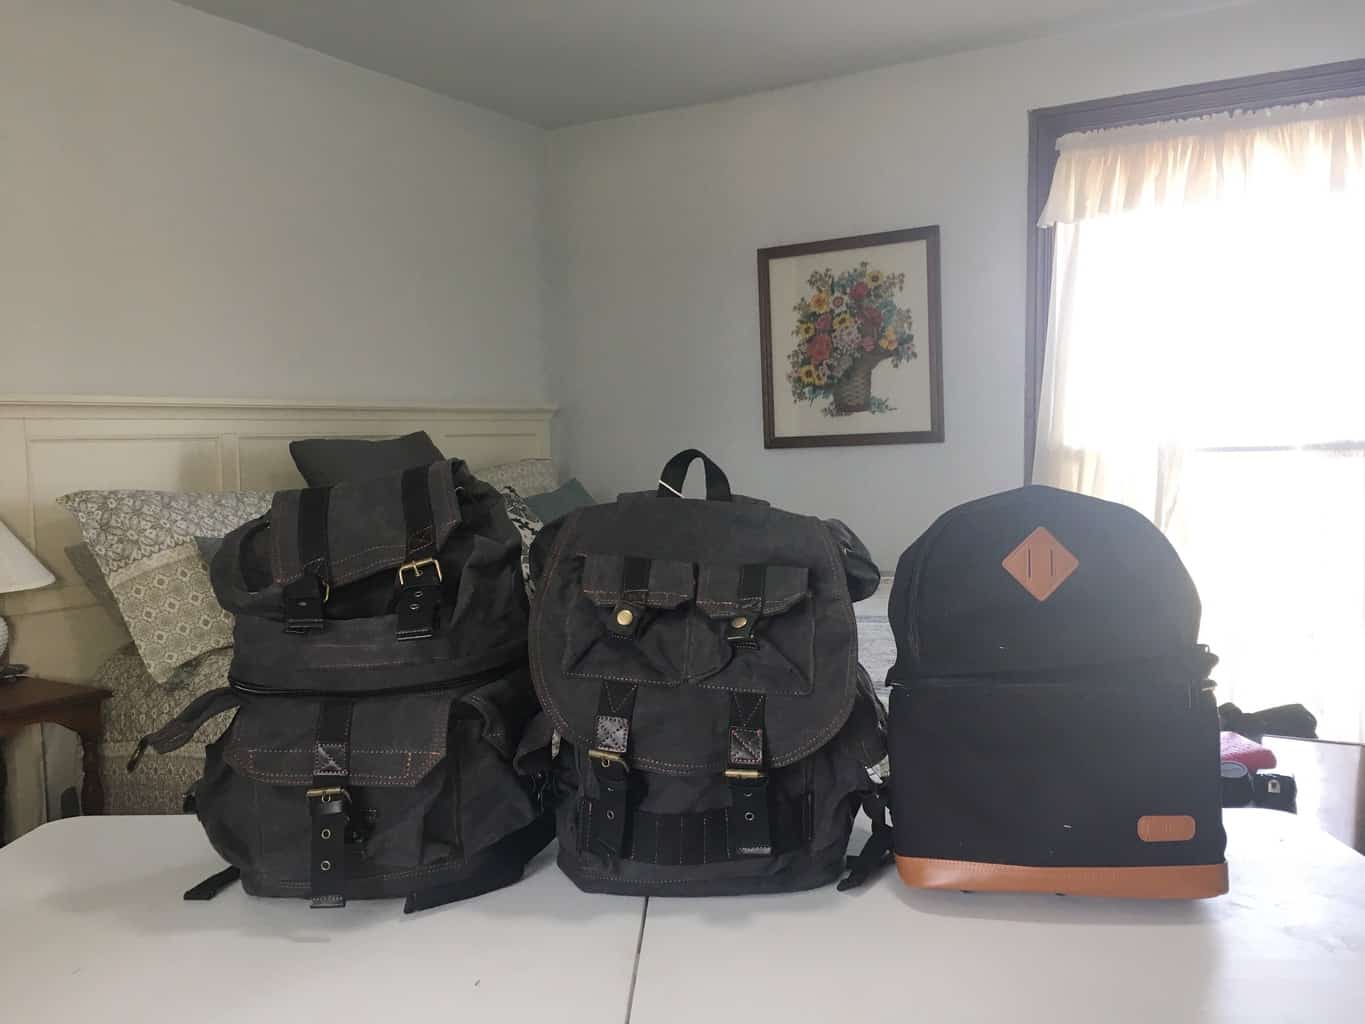 Kattee Camera Backpack Comparison and Review – Military, Rucksack, and Canvas Styles